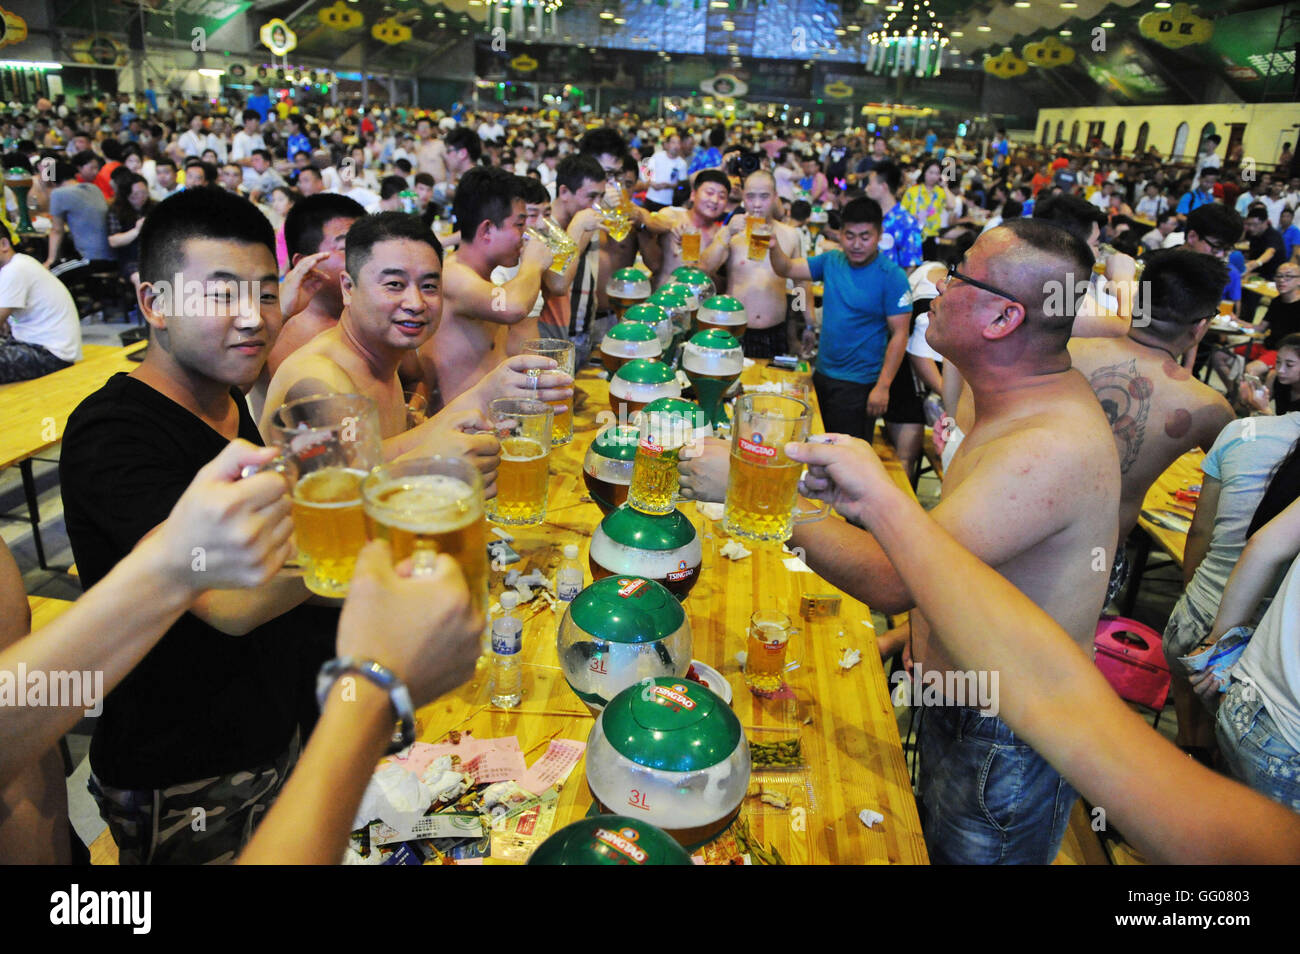 Qingdao, Qingdao, China. 2nd Aug, 2016. 26th Qingdao International Beer  Festival on August 2 in Qingdao Shandong. Beers made in Germany, Australia,  Holland attract many visitors. Credit: SIPA Asia/ZUMA Wire/Alamy Live News